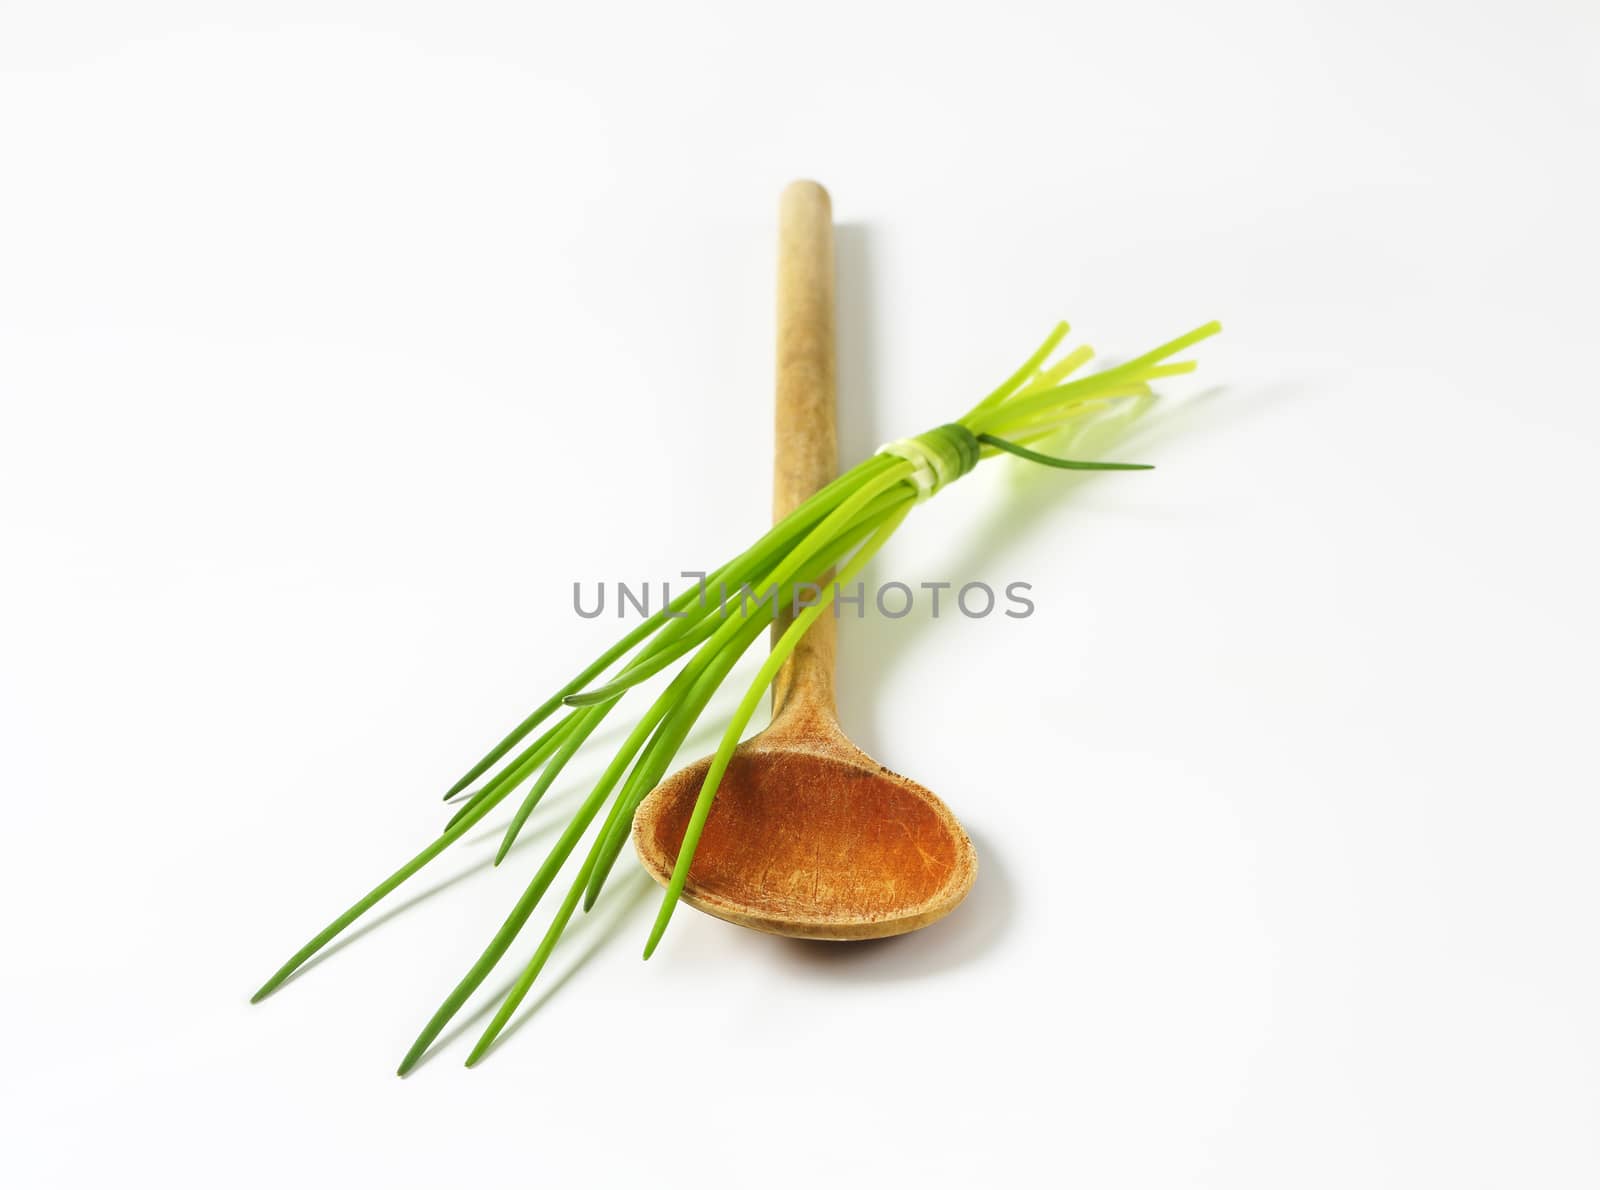 Chives and a wooden spoon by Digifoodstock